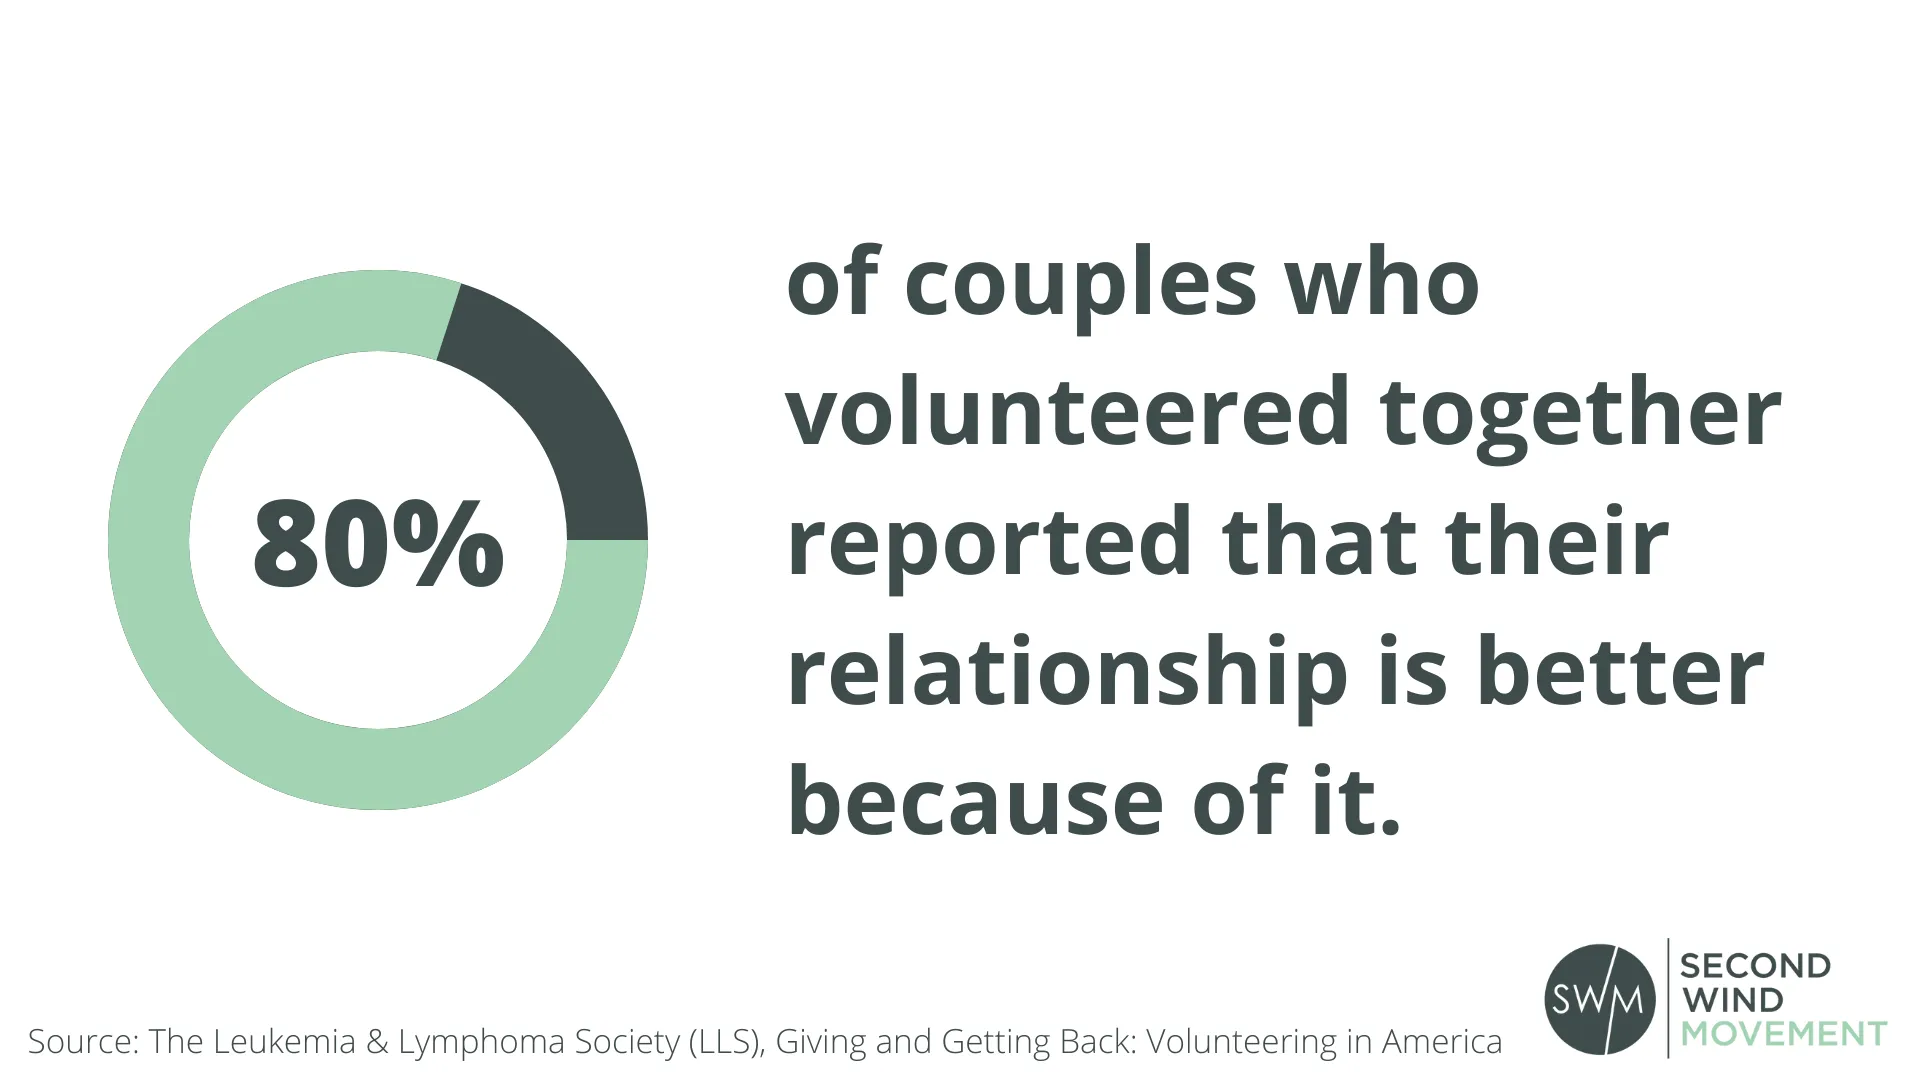 80 percent of couples who volunteered together reported that their relationship is better because of it